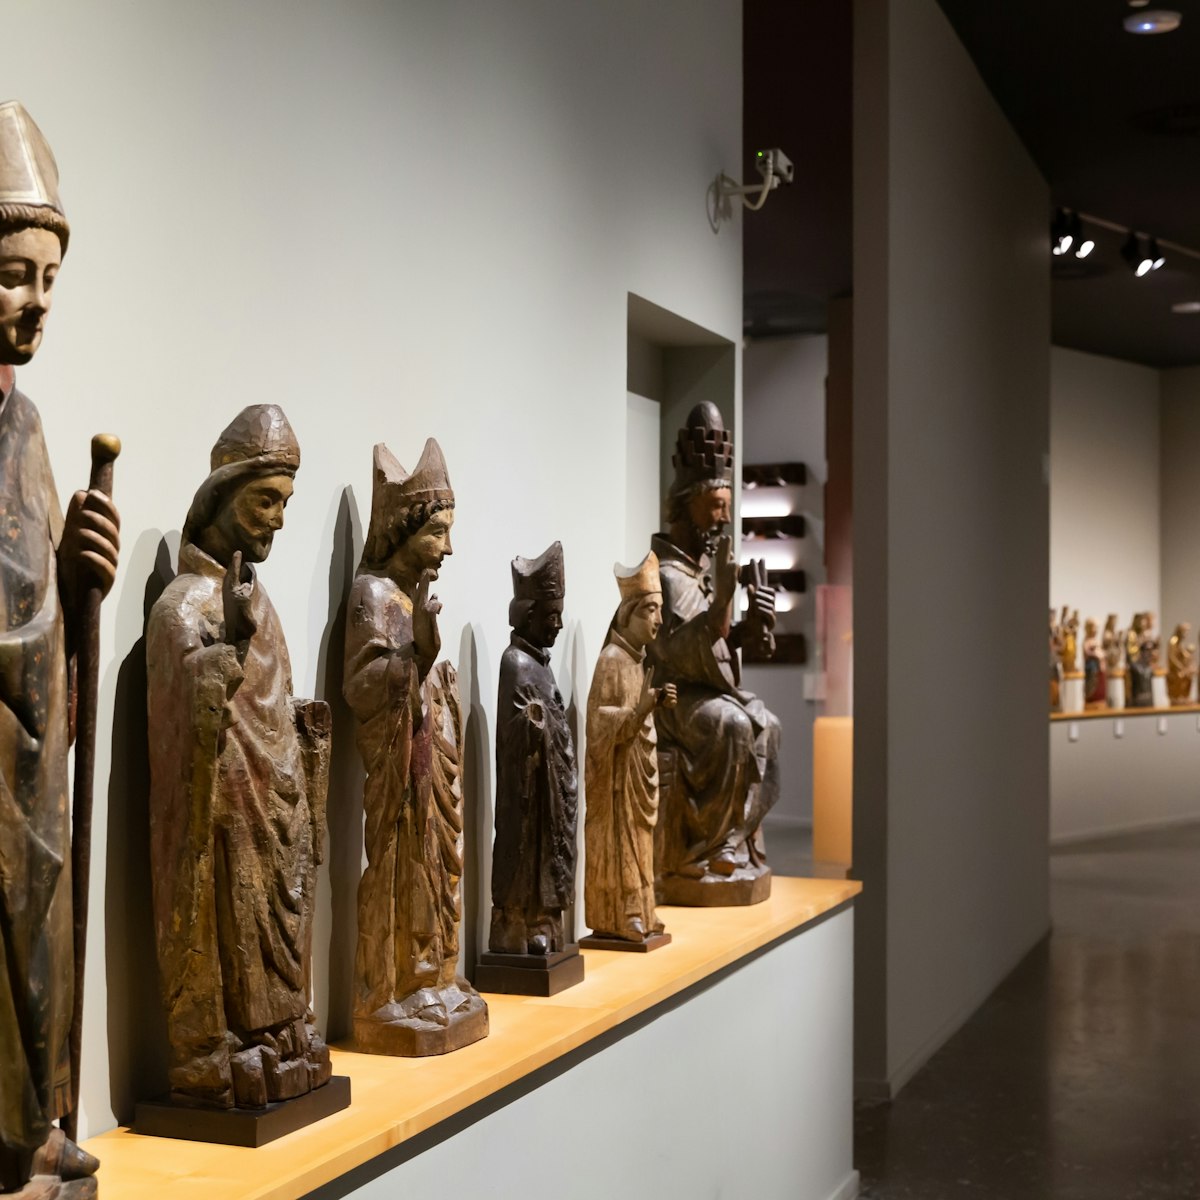 Museum of Frederic Mares in Barcelona. Sculpture collection - gothic, middle ages